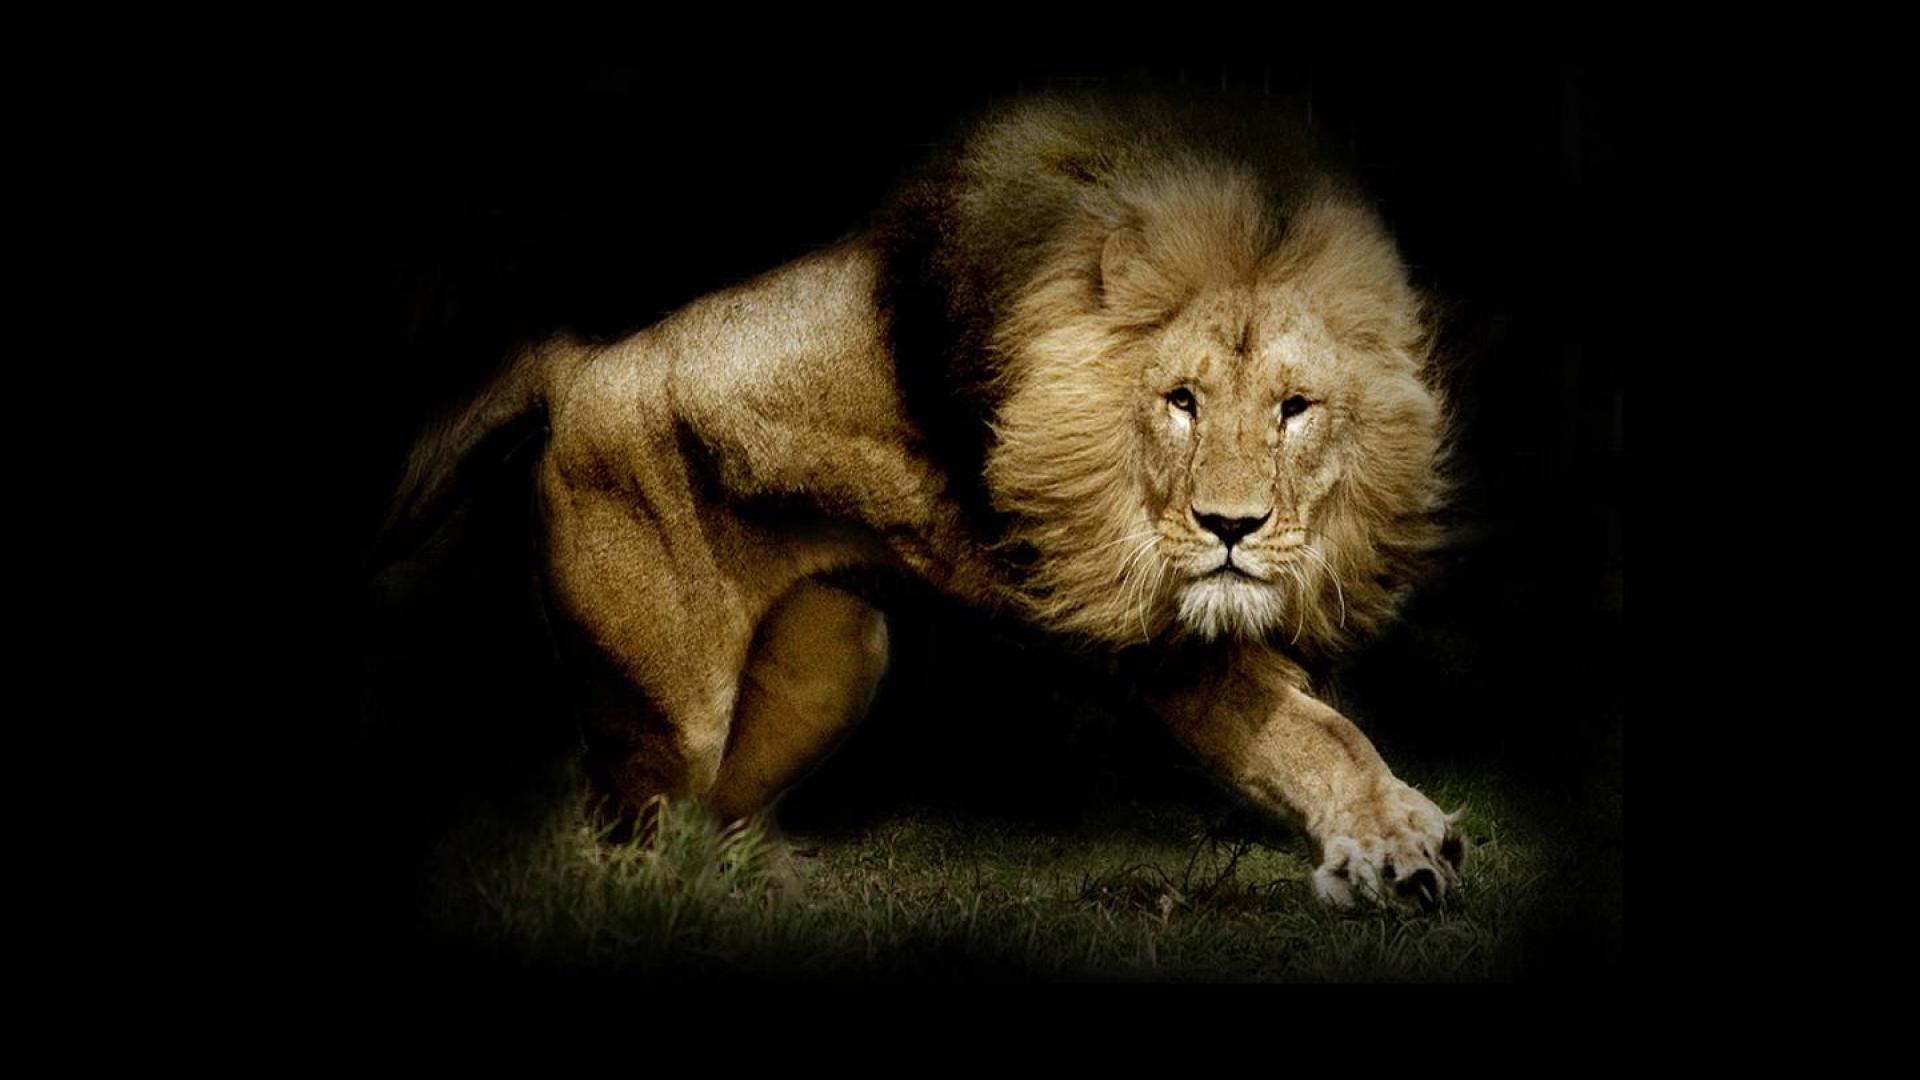 mobile desktop background awesome lion wallpapers download